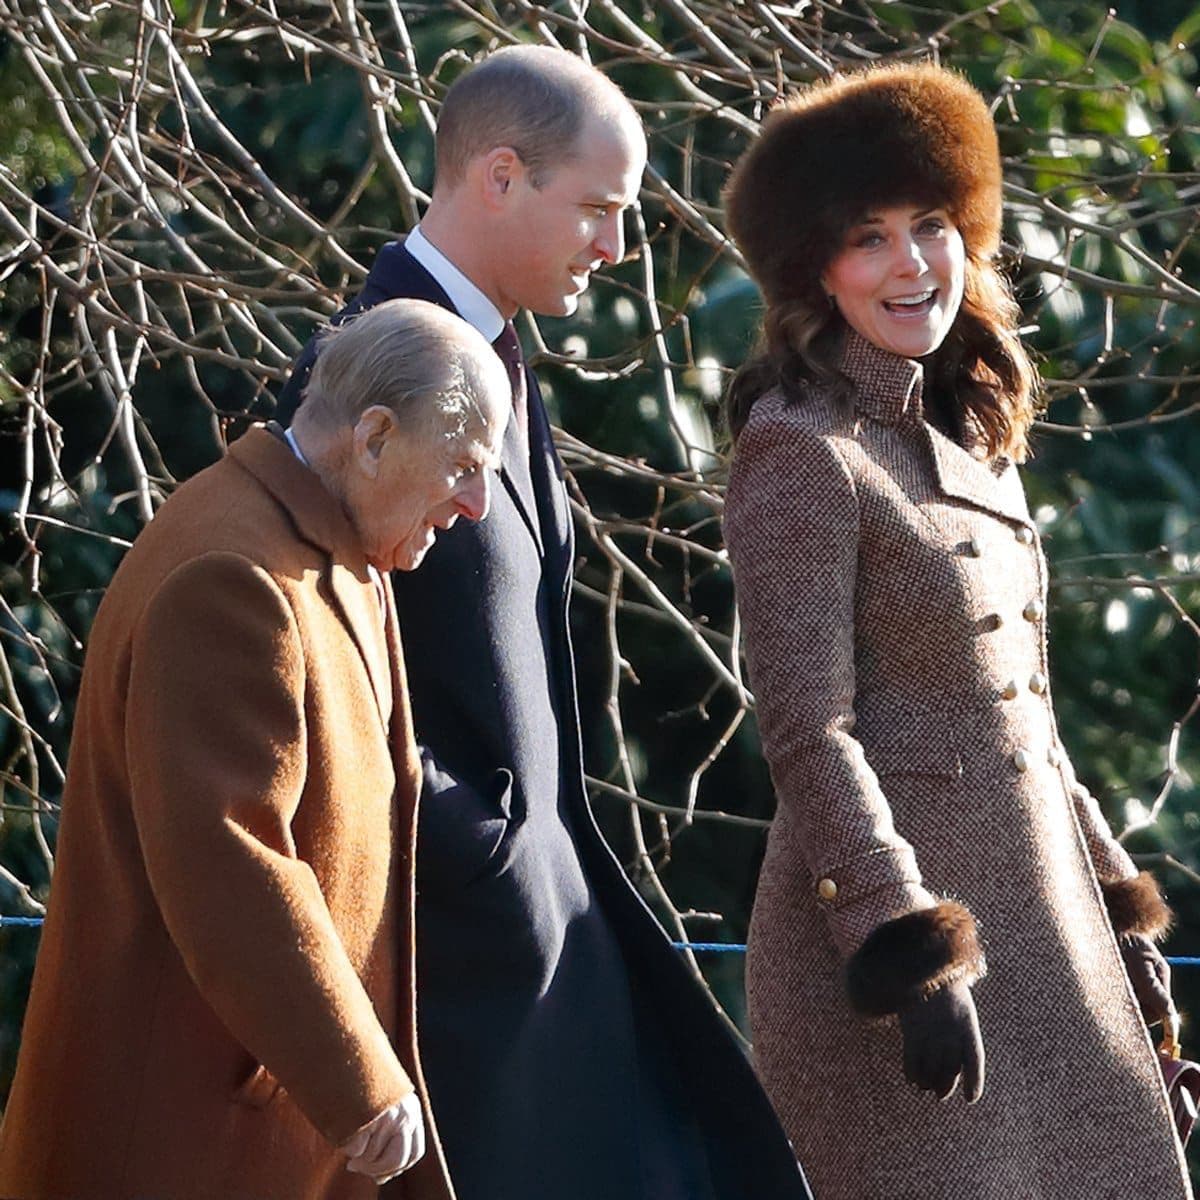 Prince William, Kate and Prince Philip attended service at St Mary Magdalene Church in 2018.